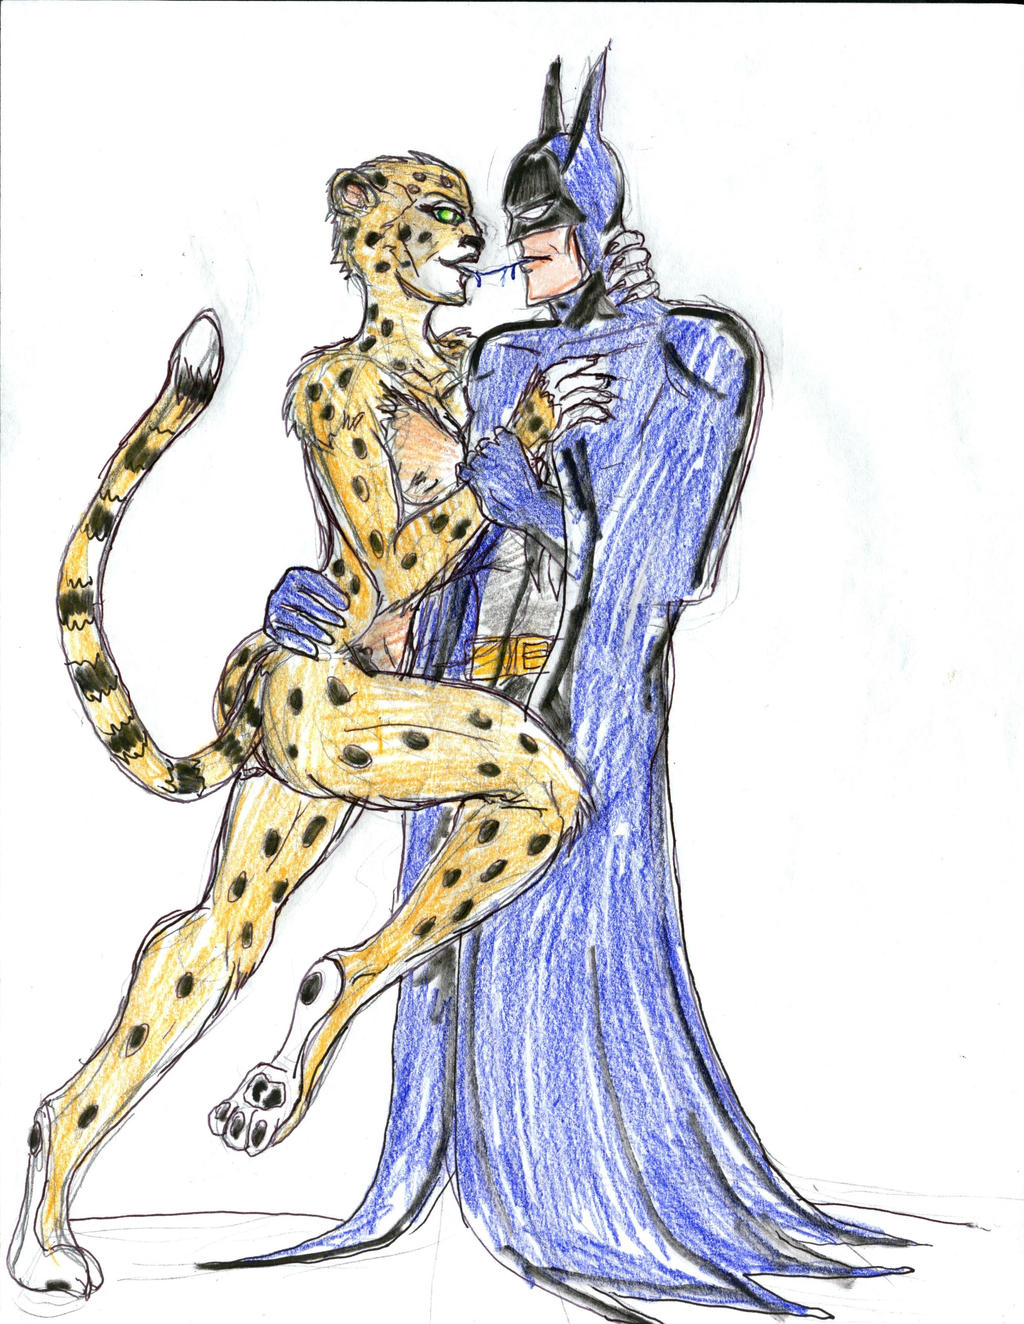 Batman And Cheetah commission by theaven on DeviantArt